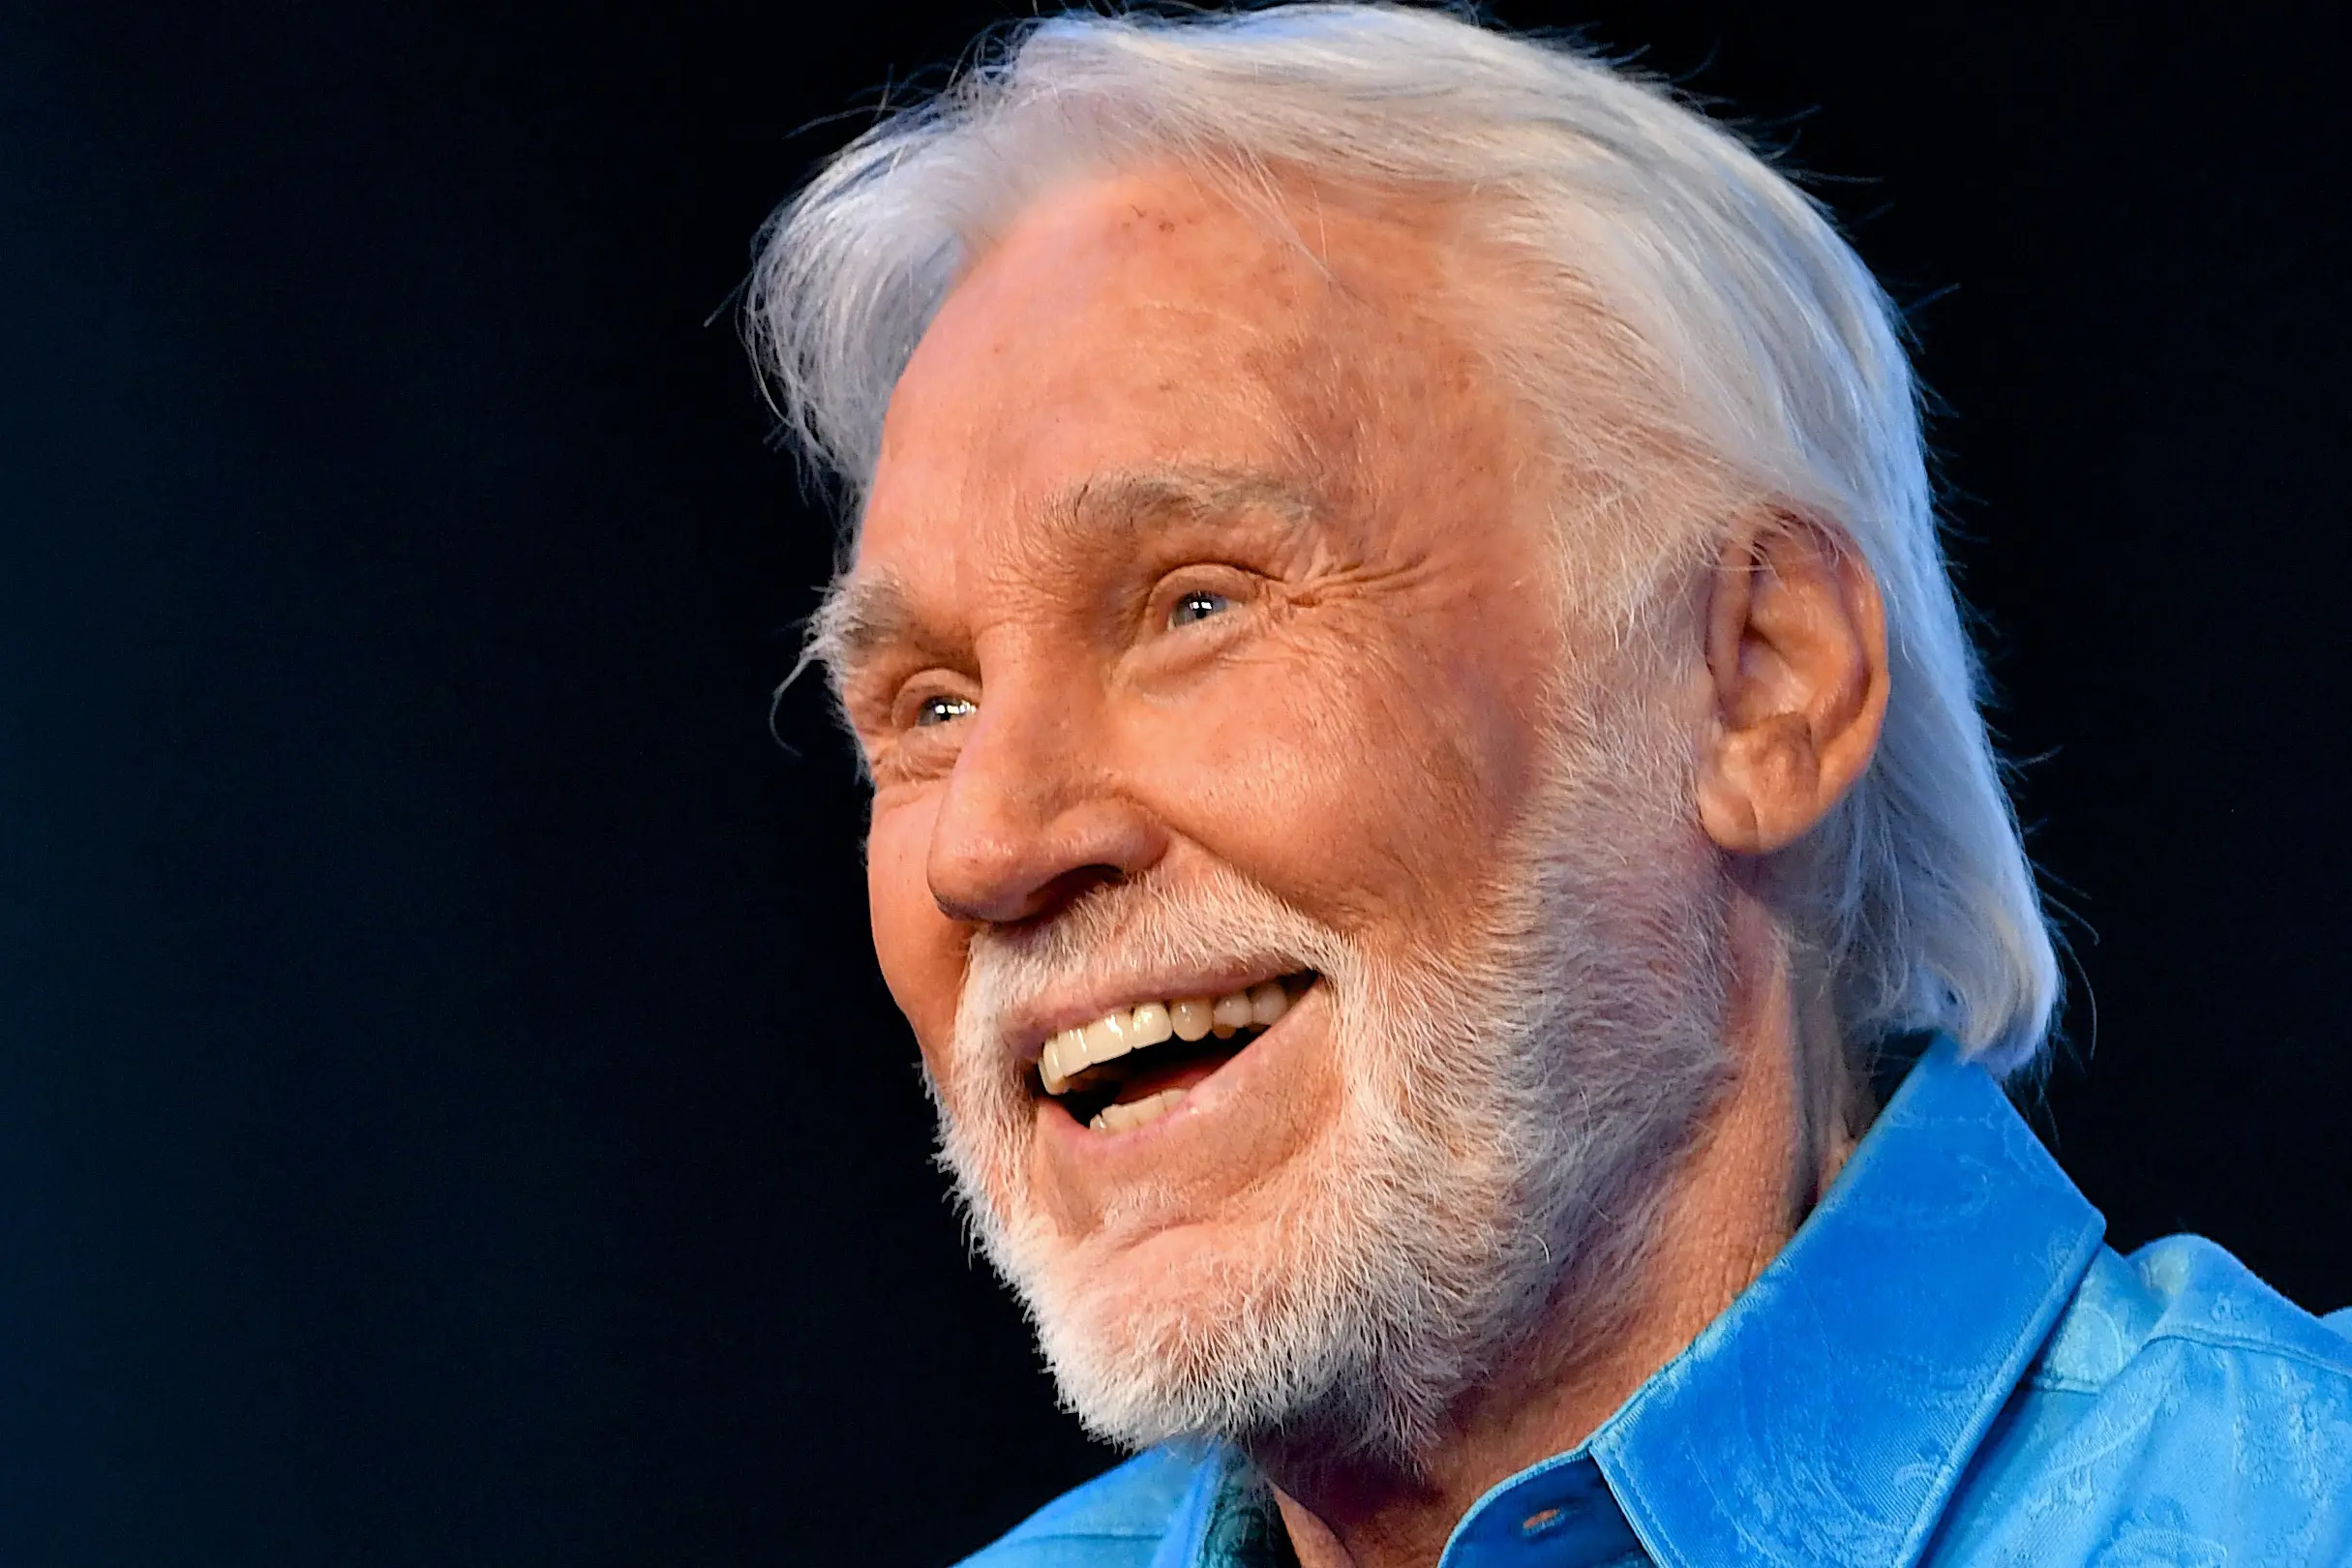 kenny rogers plastic surgery